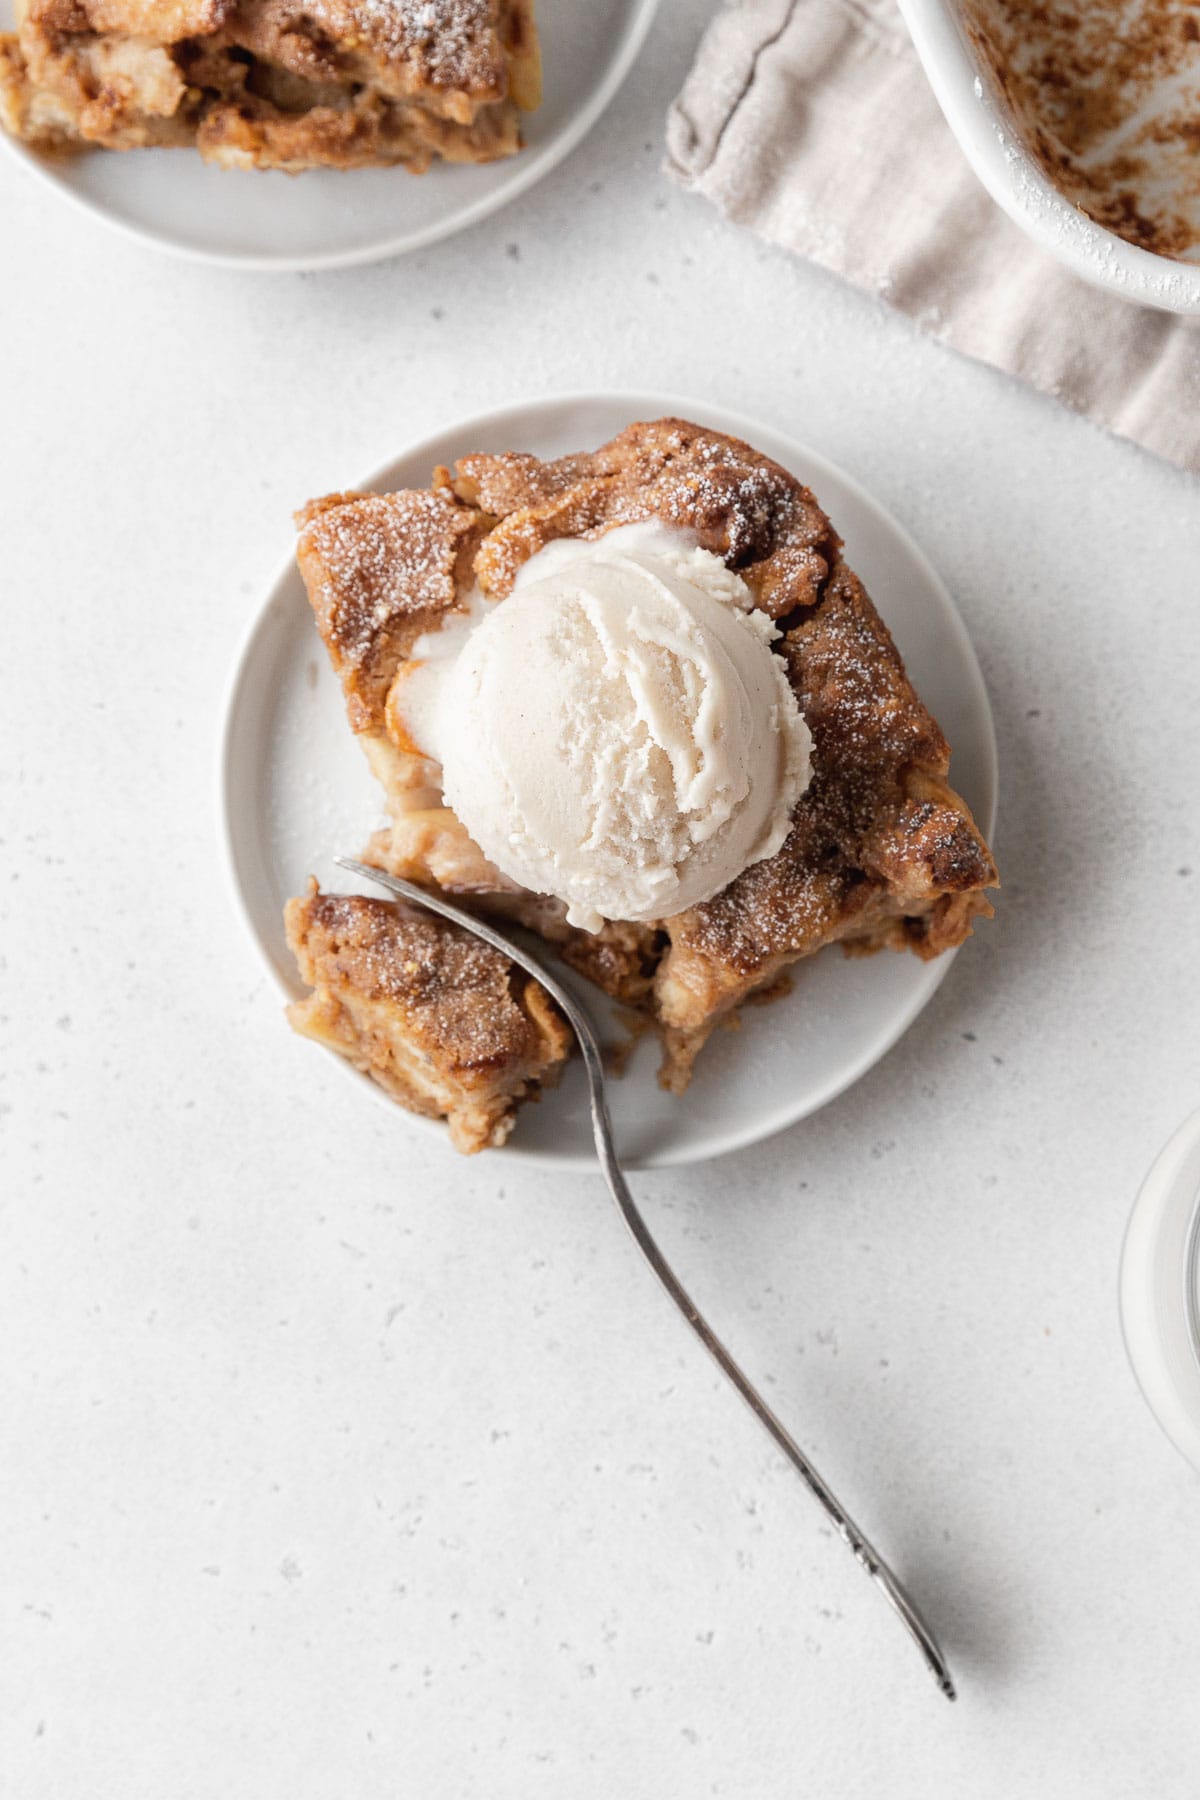 Overhead shot of a slice of vegan bread pudding topped with vanilla ice cream, with a silver fork cutting a bite off the corner.